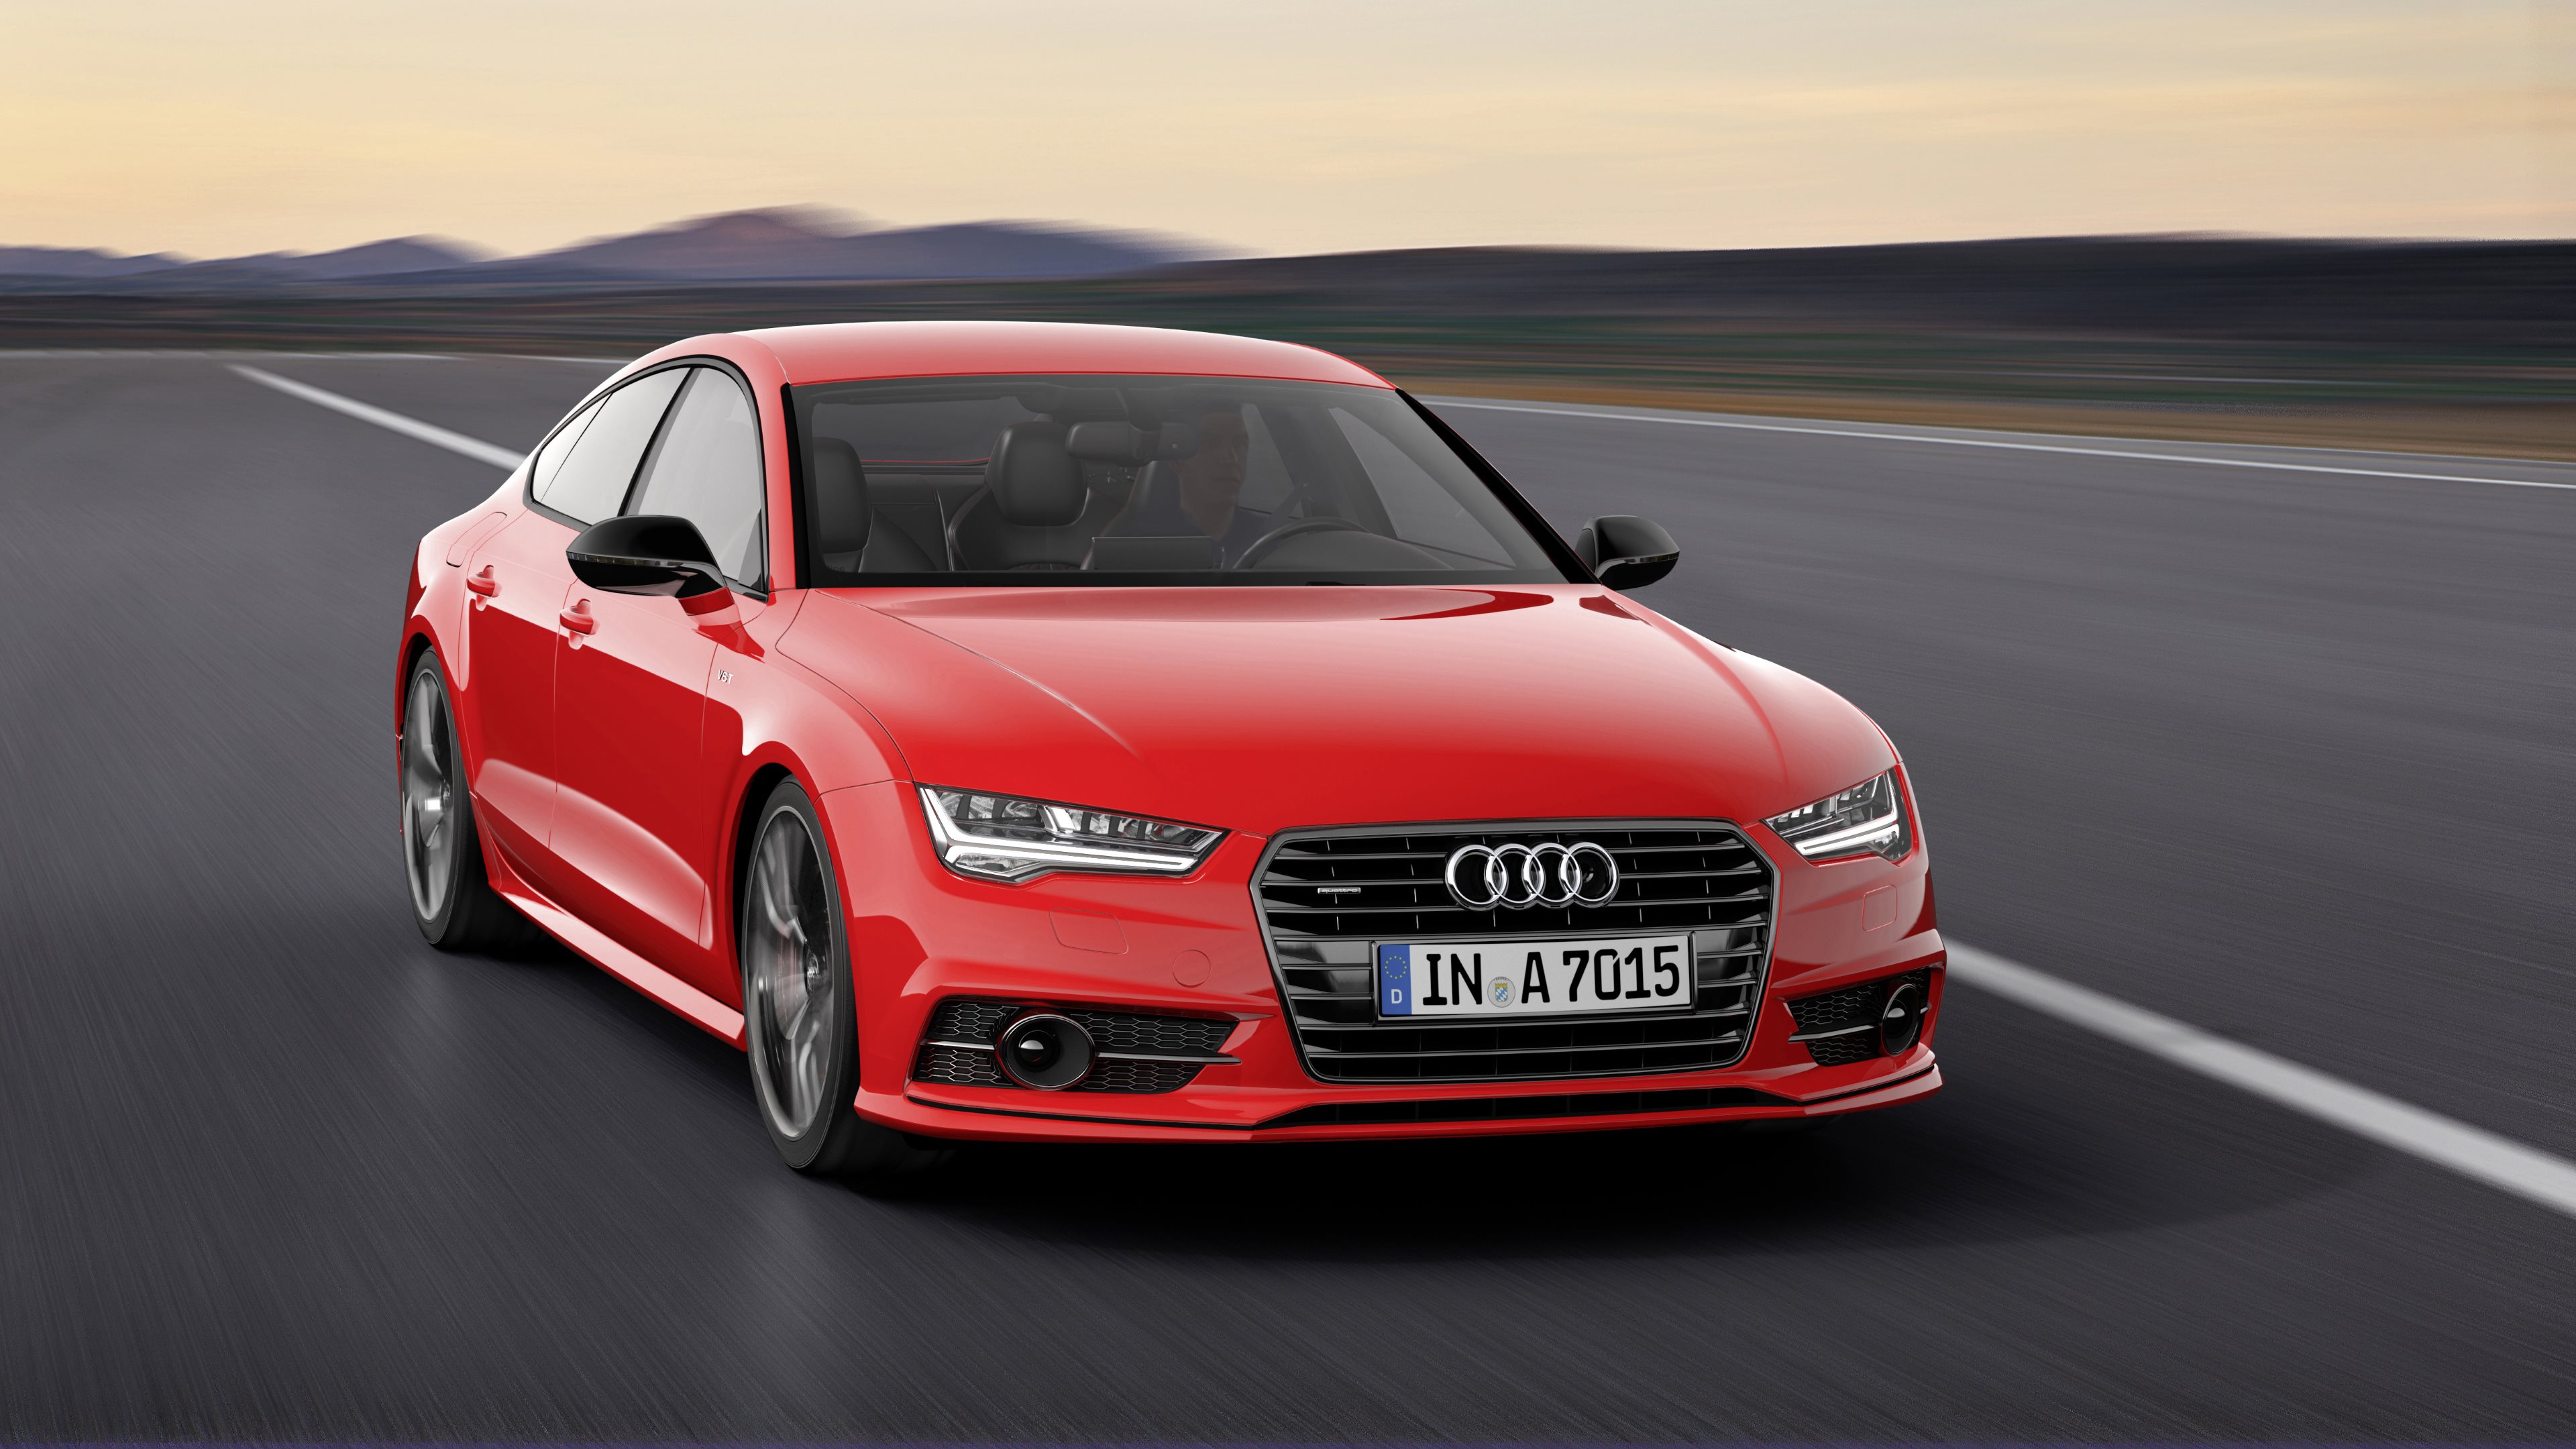 Audi A7 HD for Phone